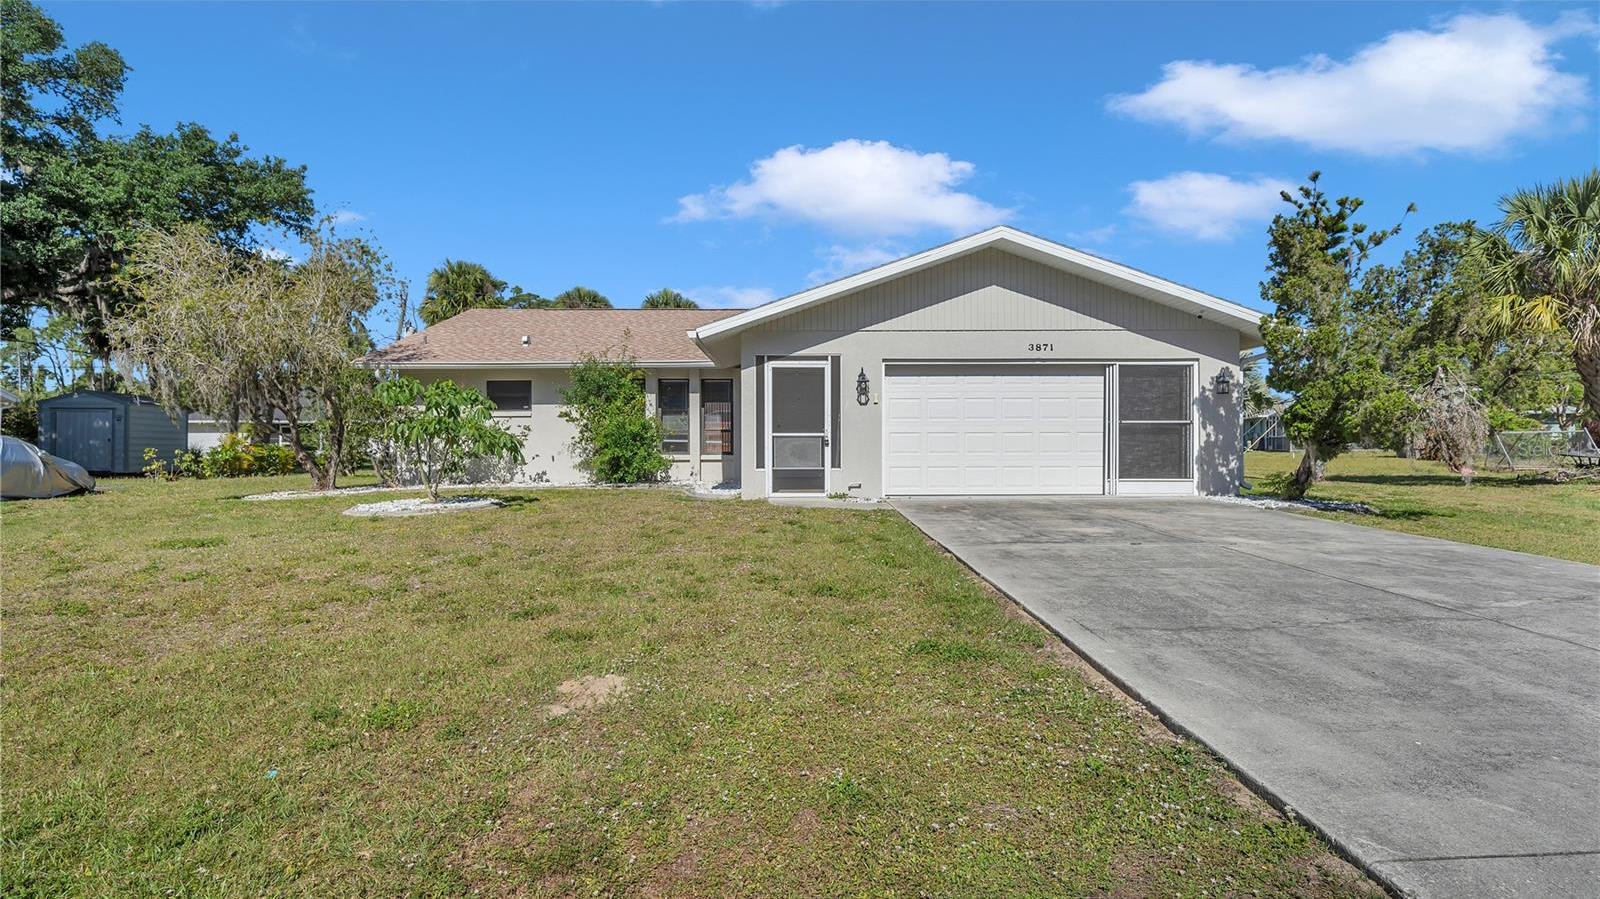 Photo one of 3871 Fontainebleau St North Port FL 34287 | MLS A4608581